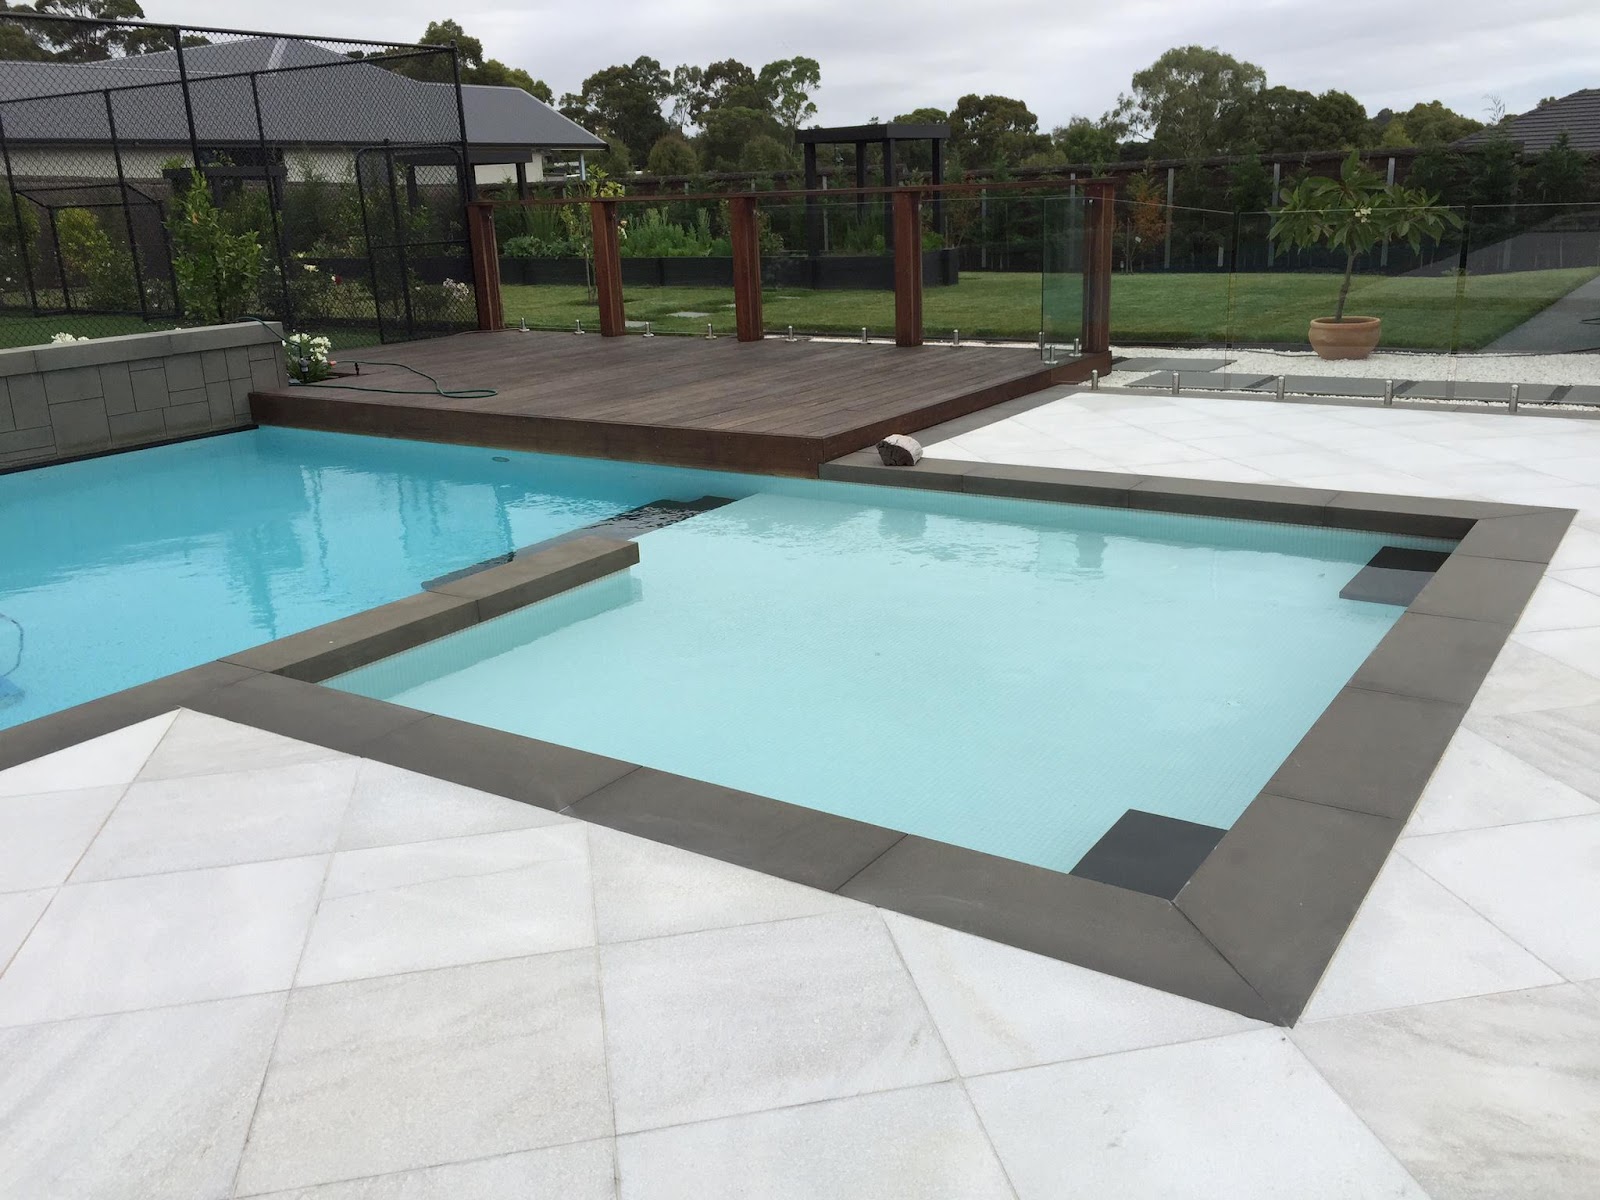 SWIMMING POOL PAVING WITH BULLNOSE COPING AT EXCITING PRICES